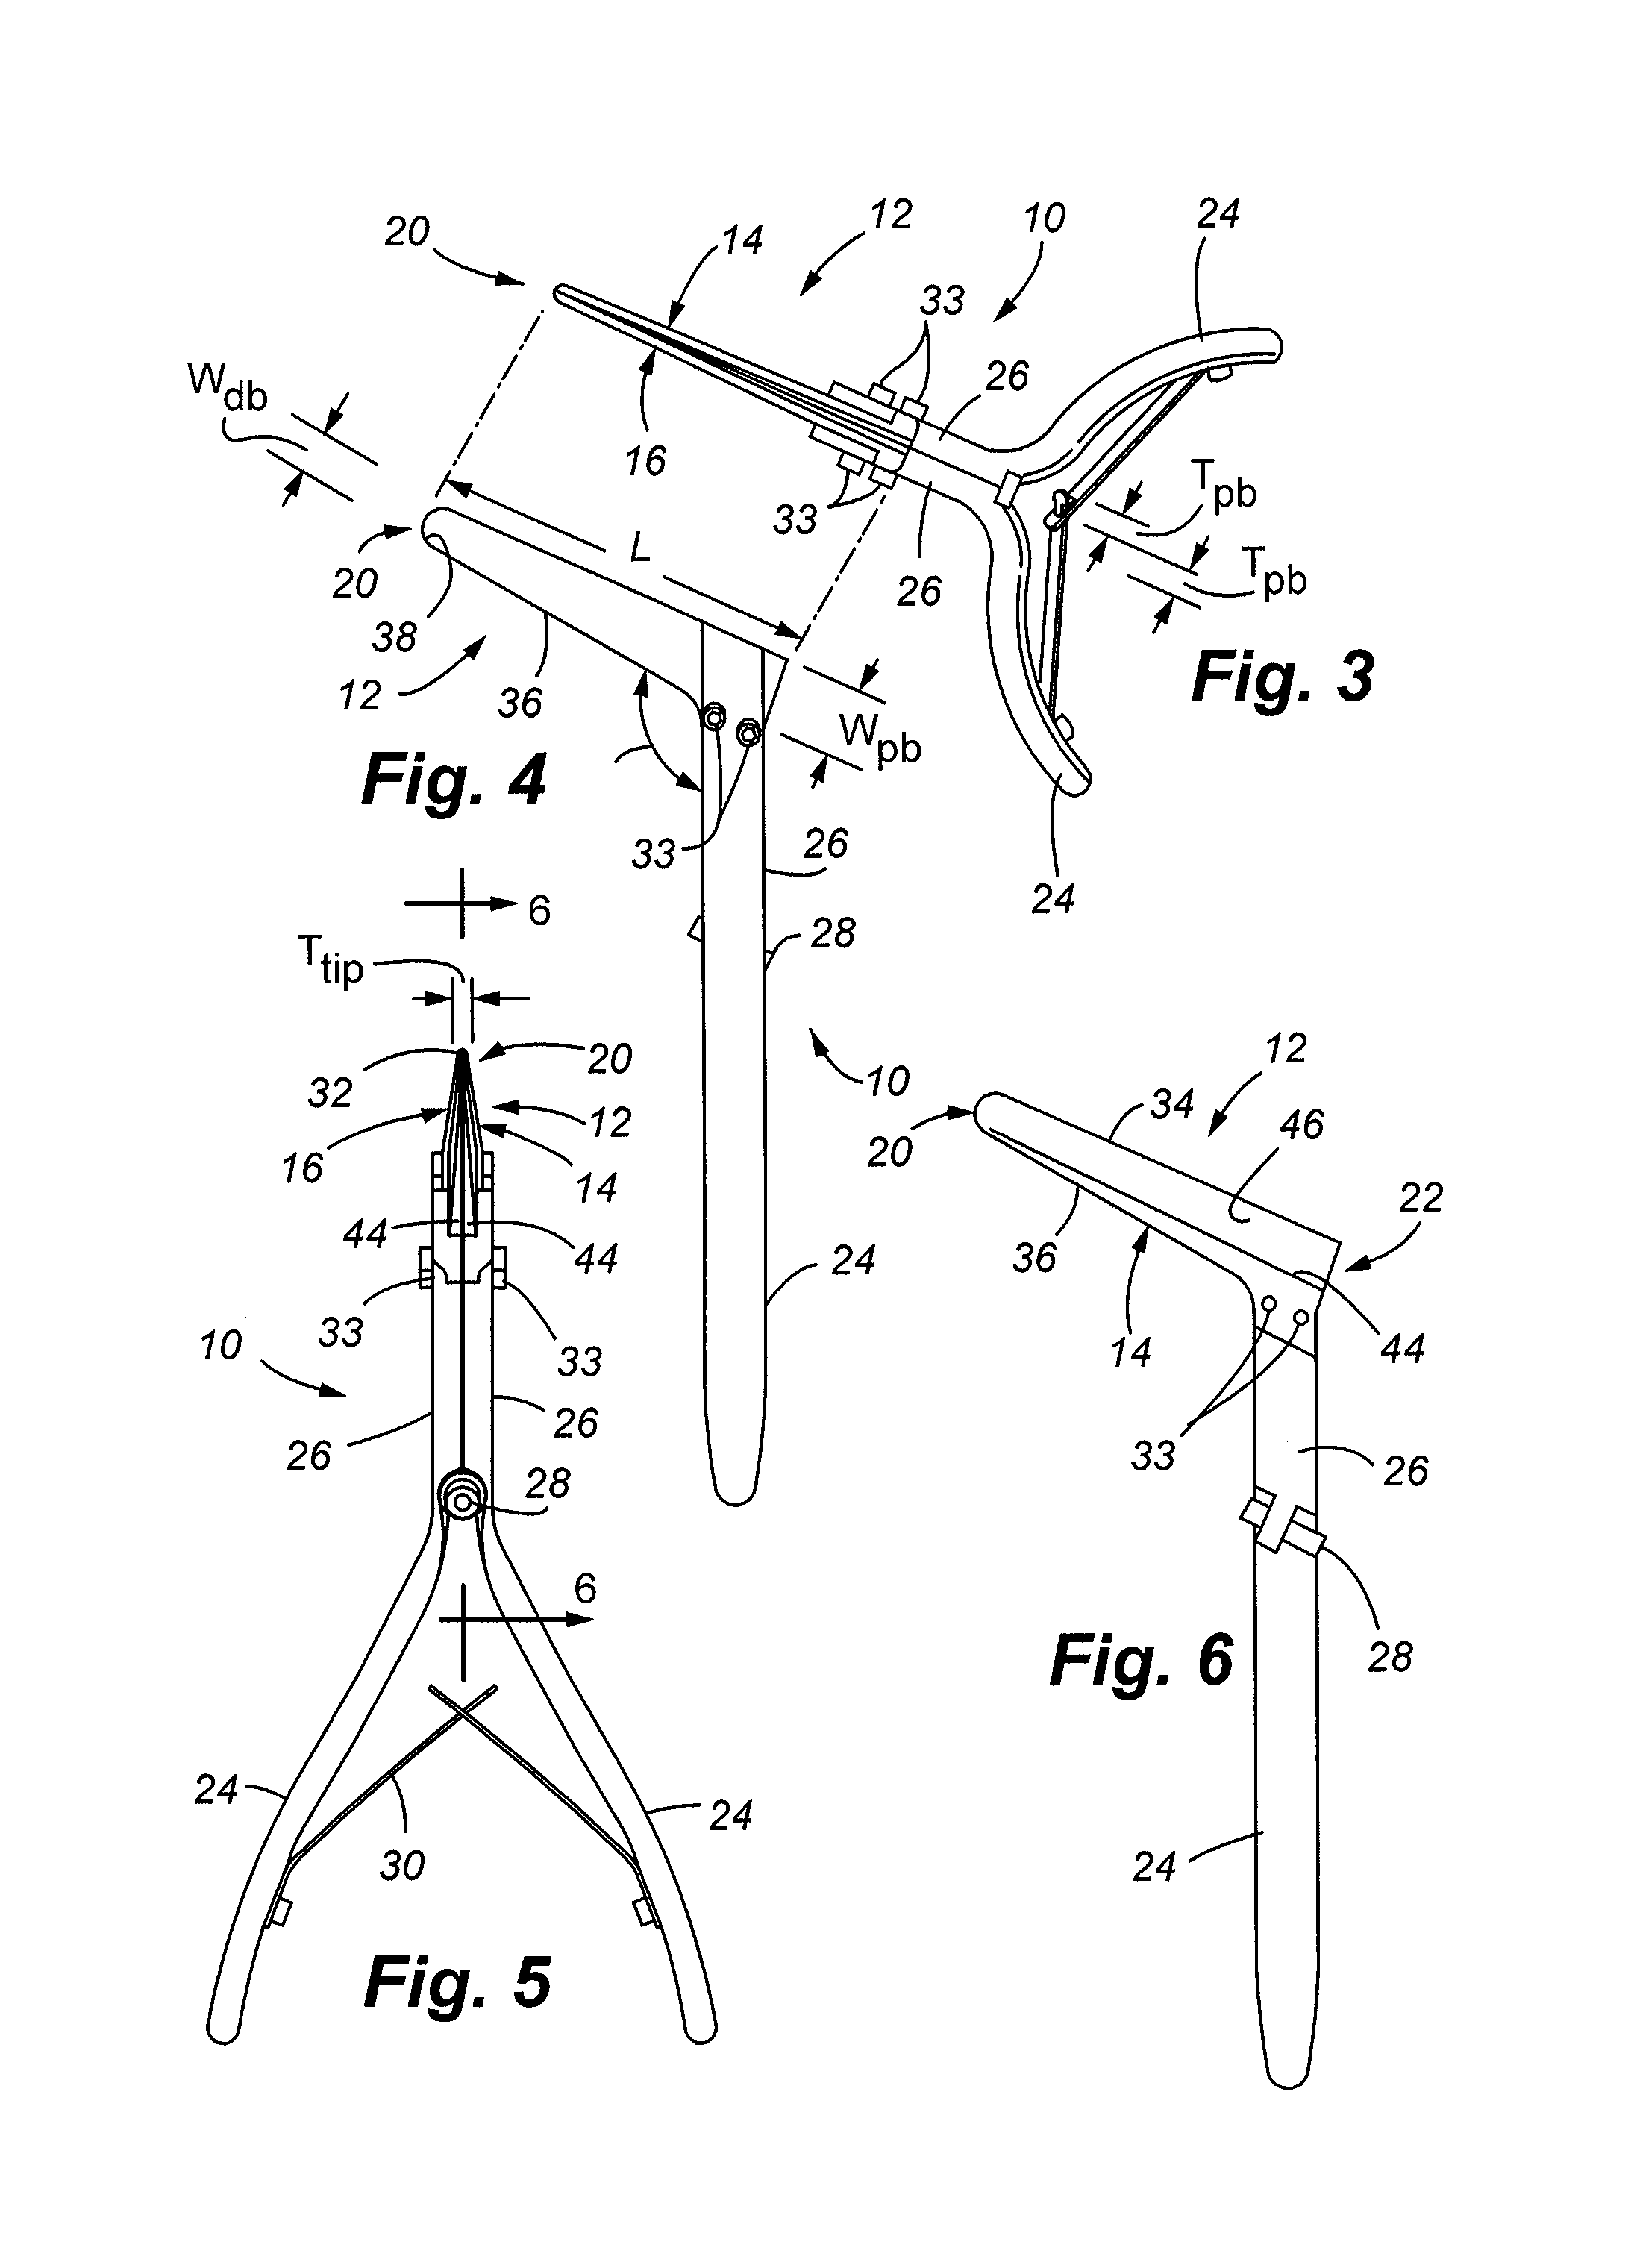 Intermuscular guide for retractor insertion and method of use